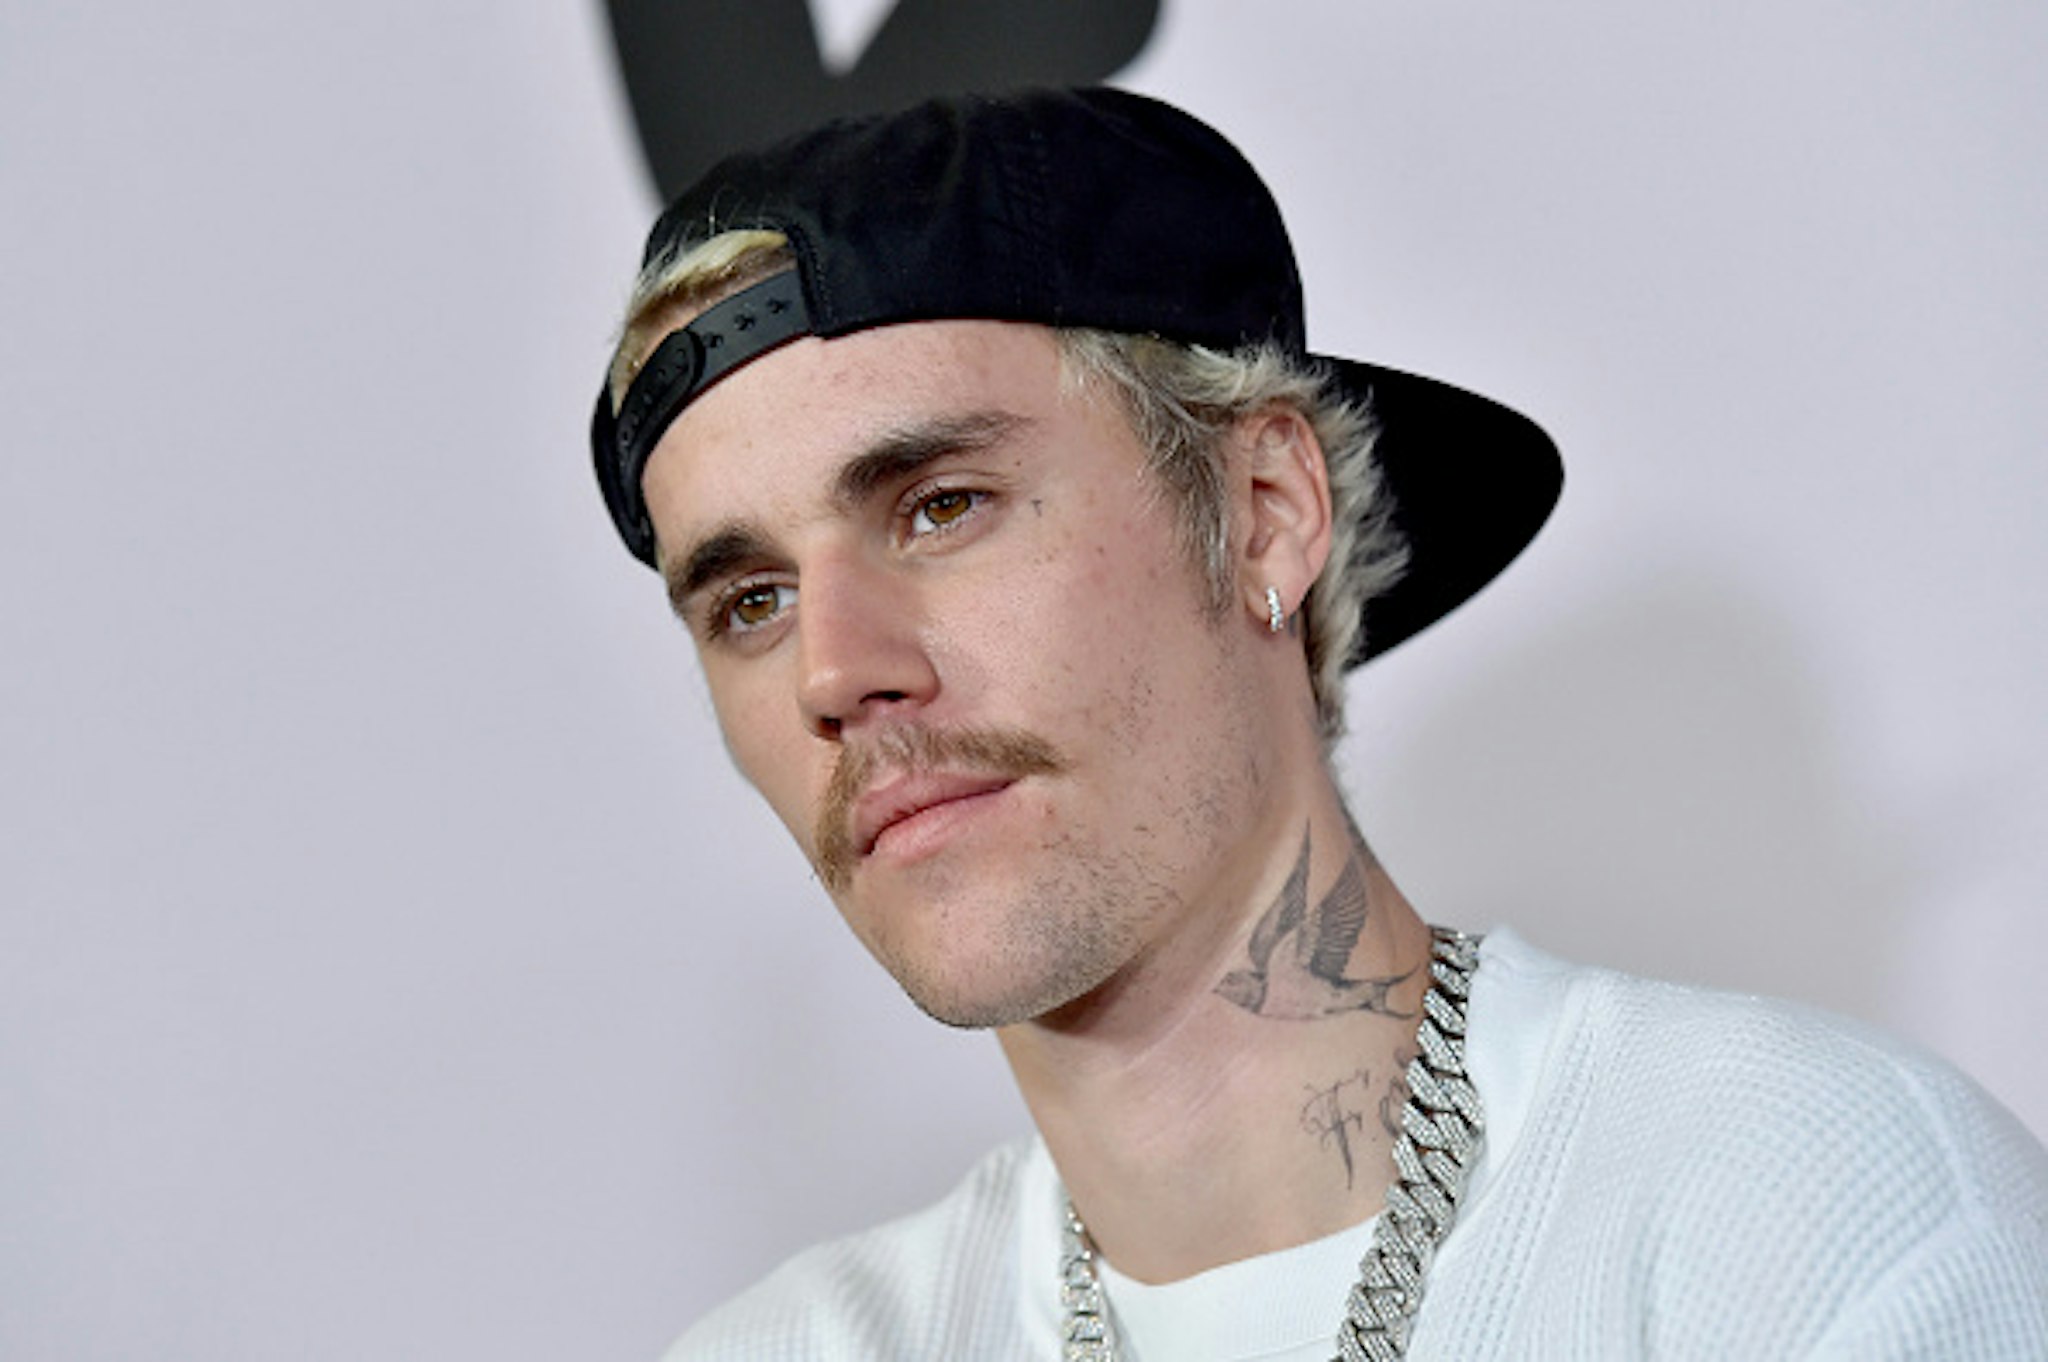 LOS ANGELES, CALIFORNIA - JANUARY 27: Justin Bieber attends the Premiere of YouTube Original's "Justin Bieber: Seasons" at Regency Bruin Theatre on January 27, 2020 in Los Angeles, California.